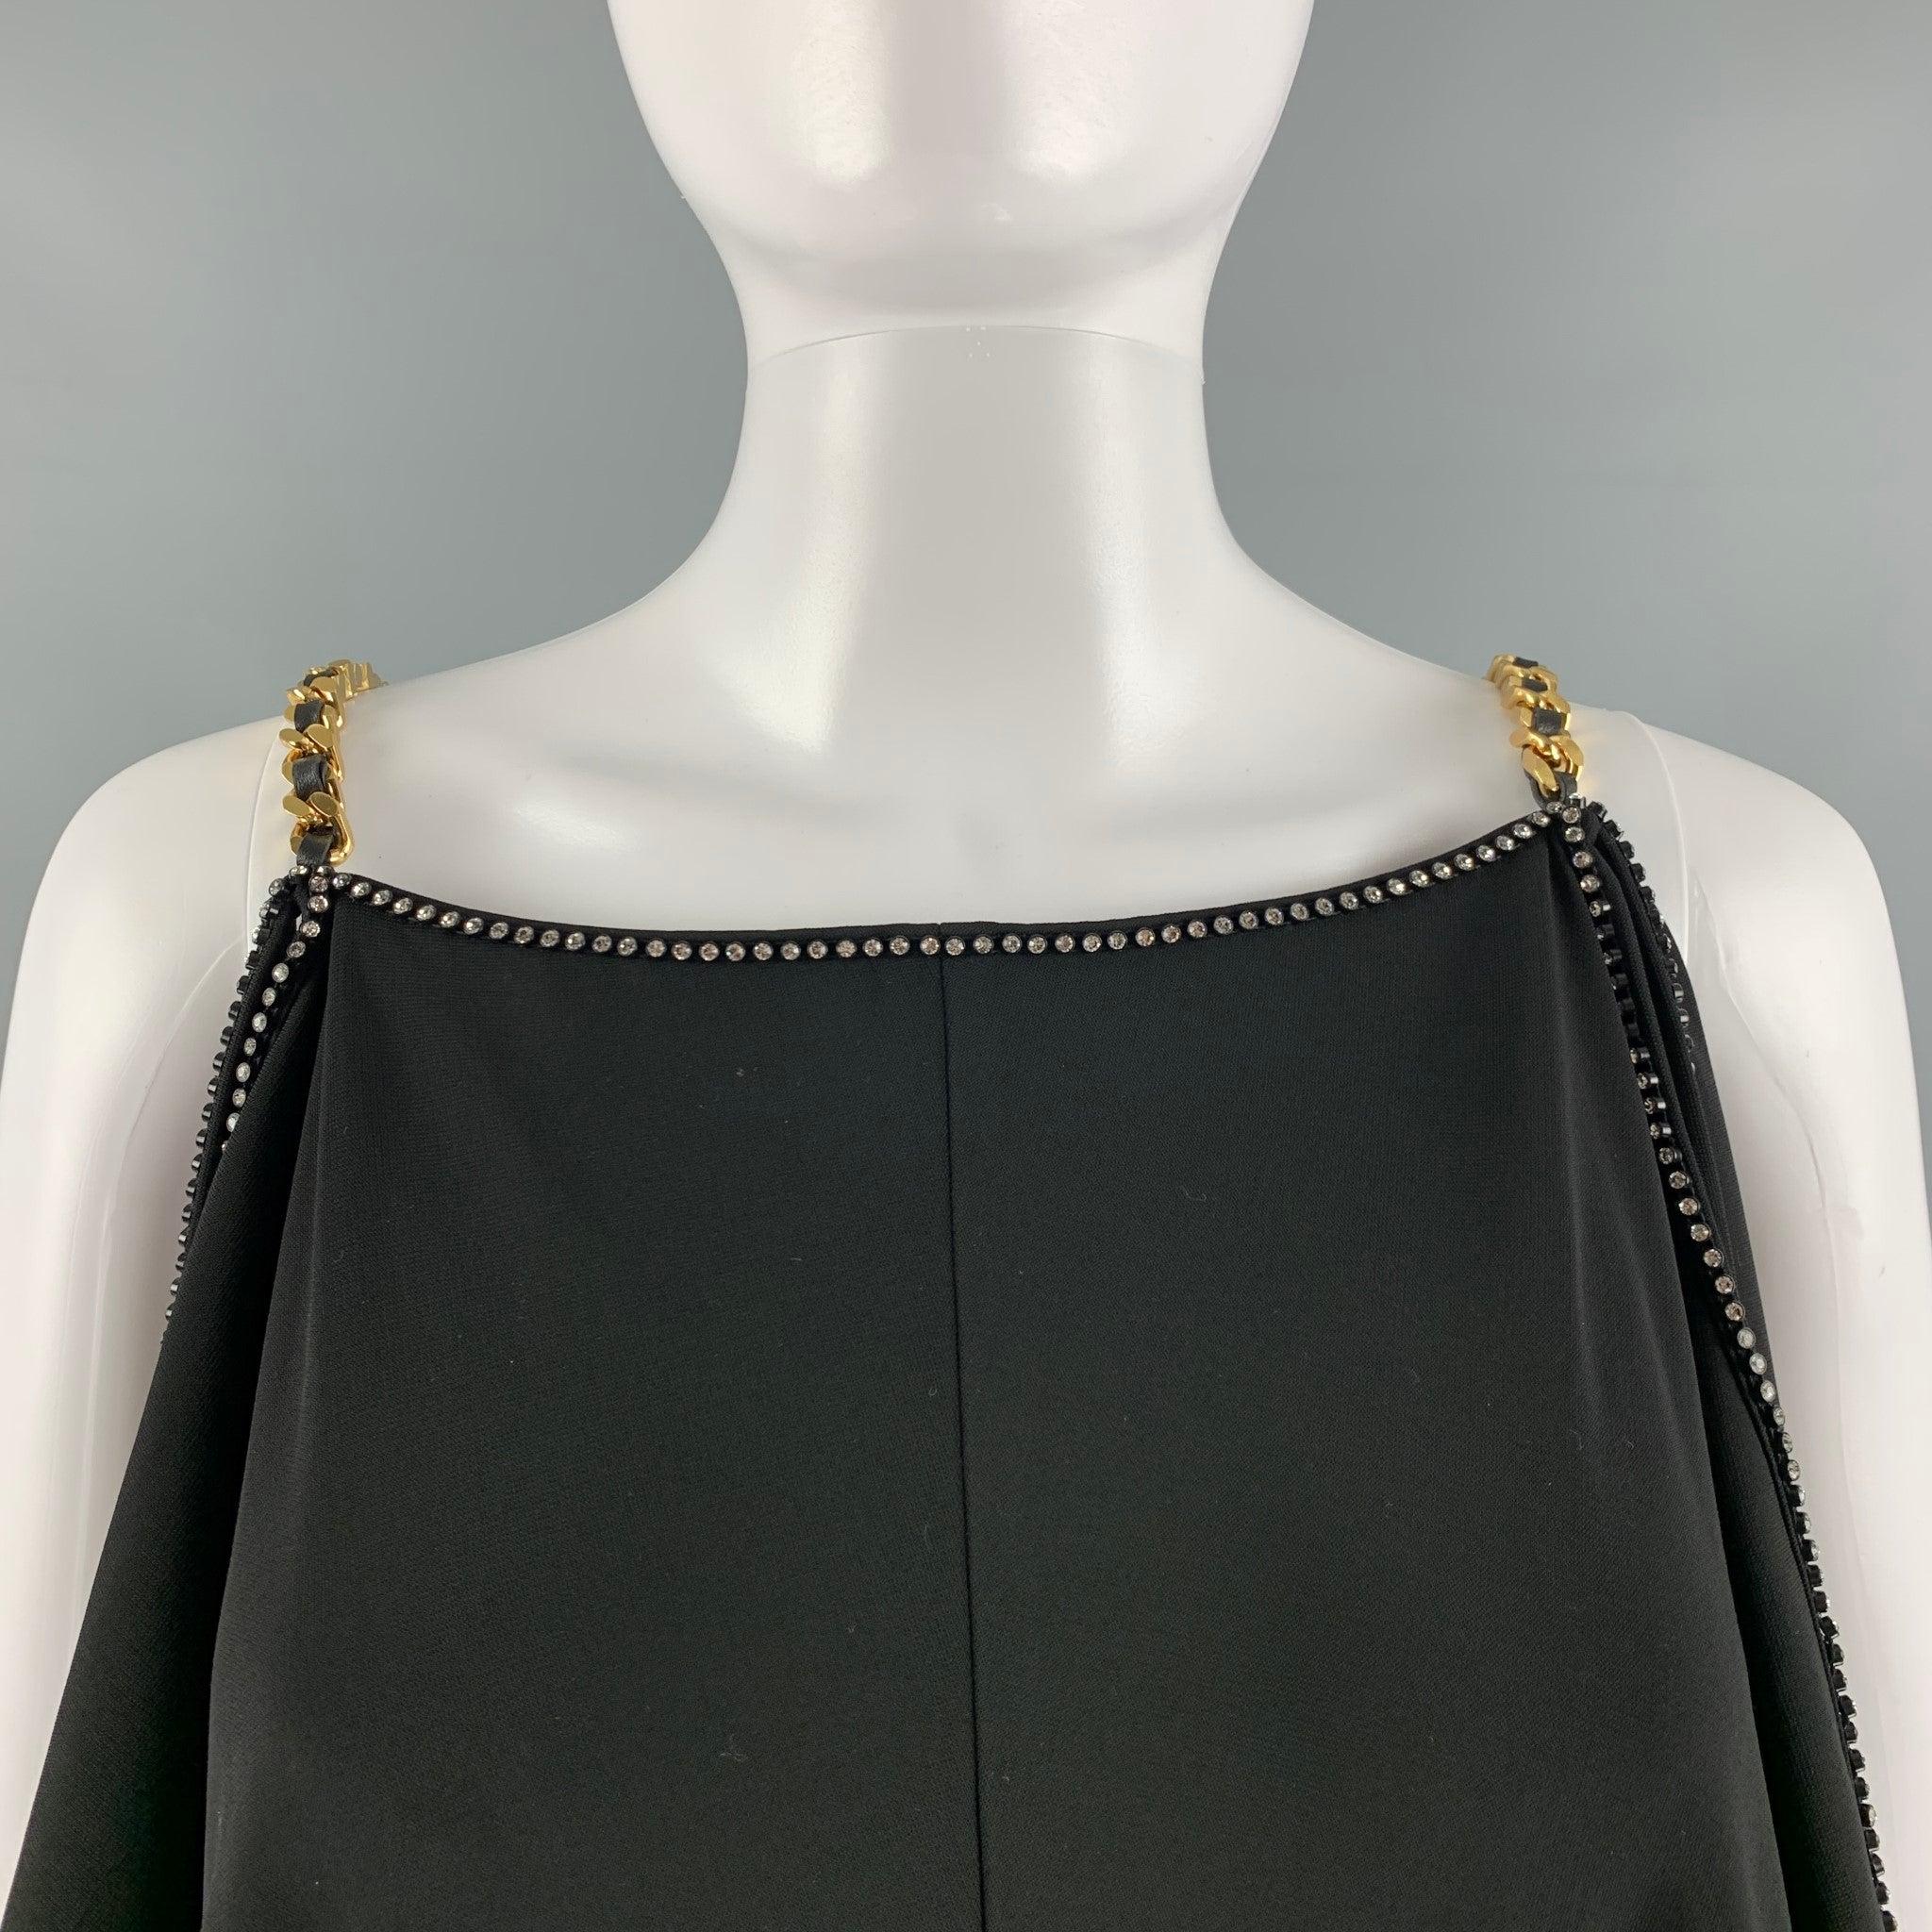 BURBERRY long dress comes in a black viscose elastane knit material featuring a chain gold tone shoulder strap, rhinestones accents, and a front slit. Made in Italy.New with Tags. 

Marked:   4 

Measurements: 
  Bust: 44 inches Waist: 42 inches